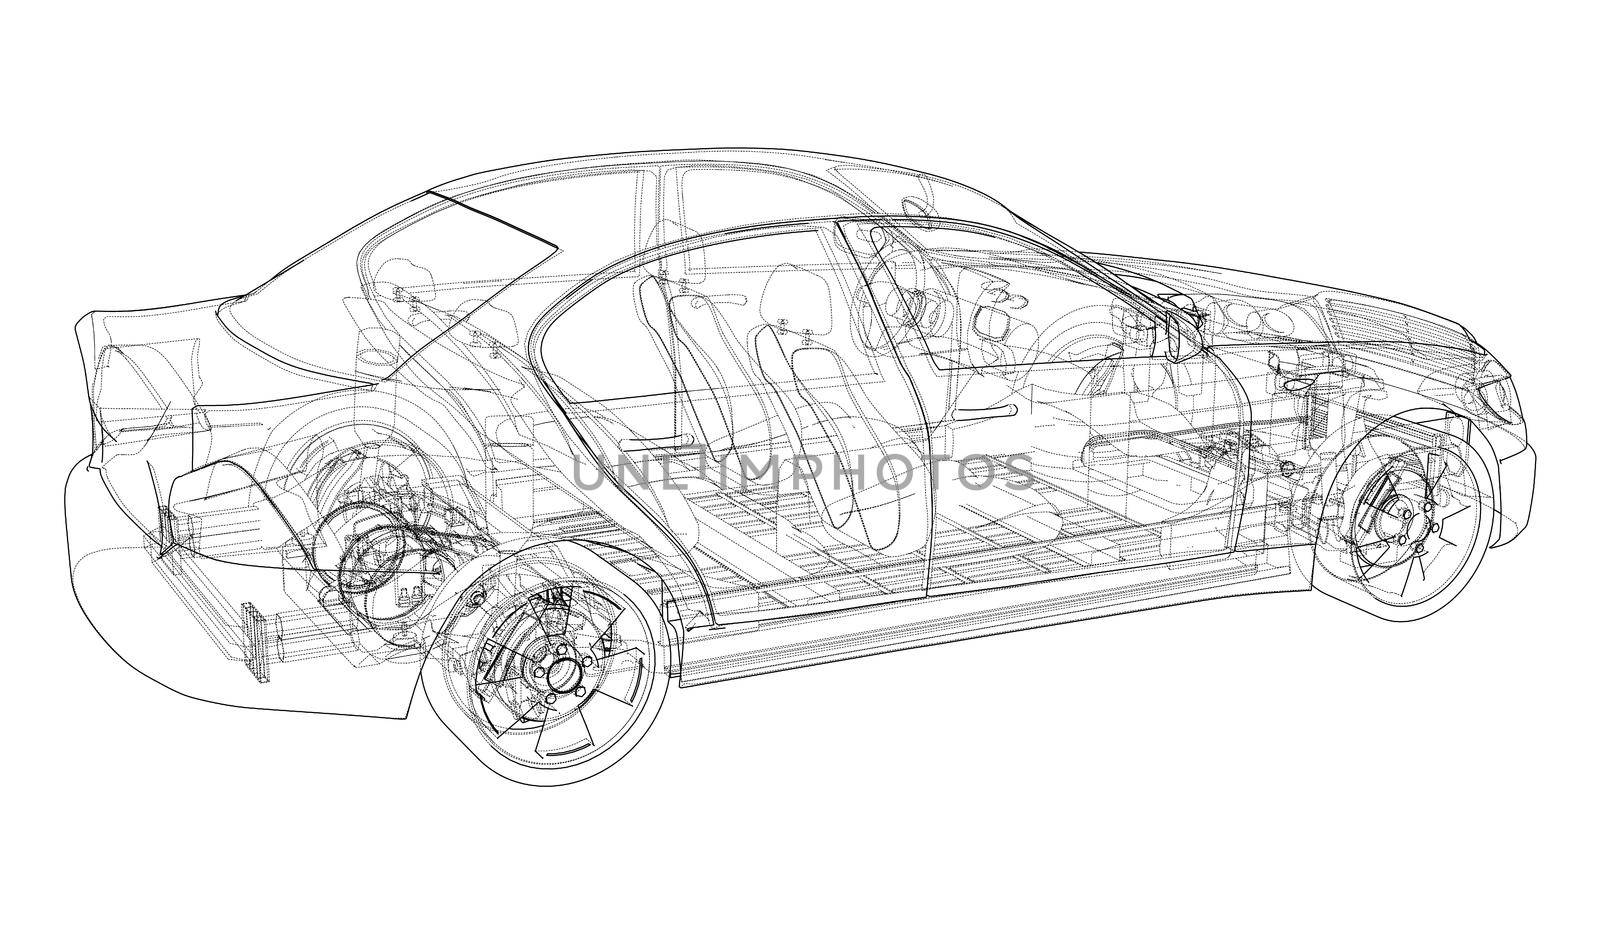 Electric Car With Chassis. Battery, suspension and wheel drive. 3d illustration